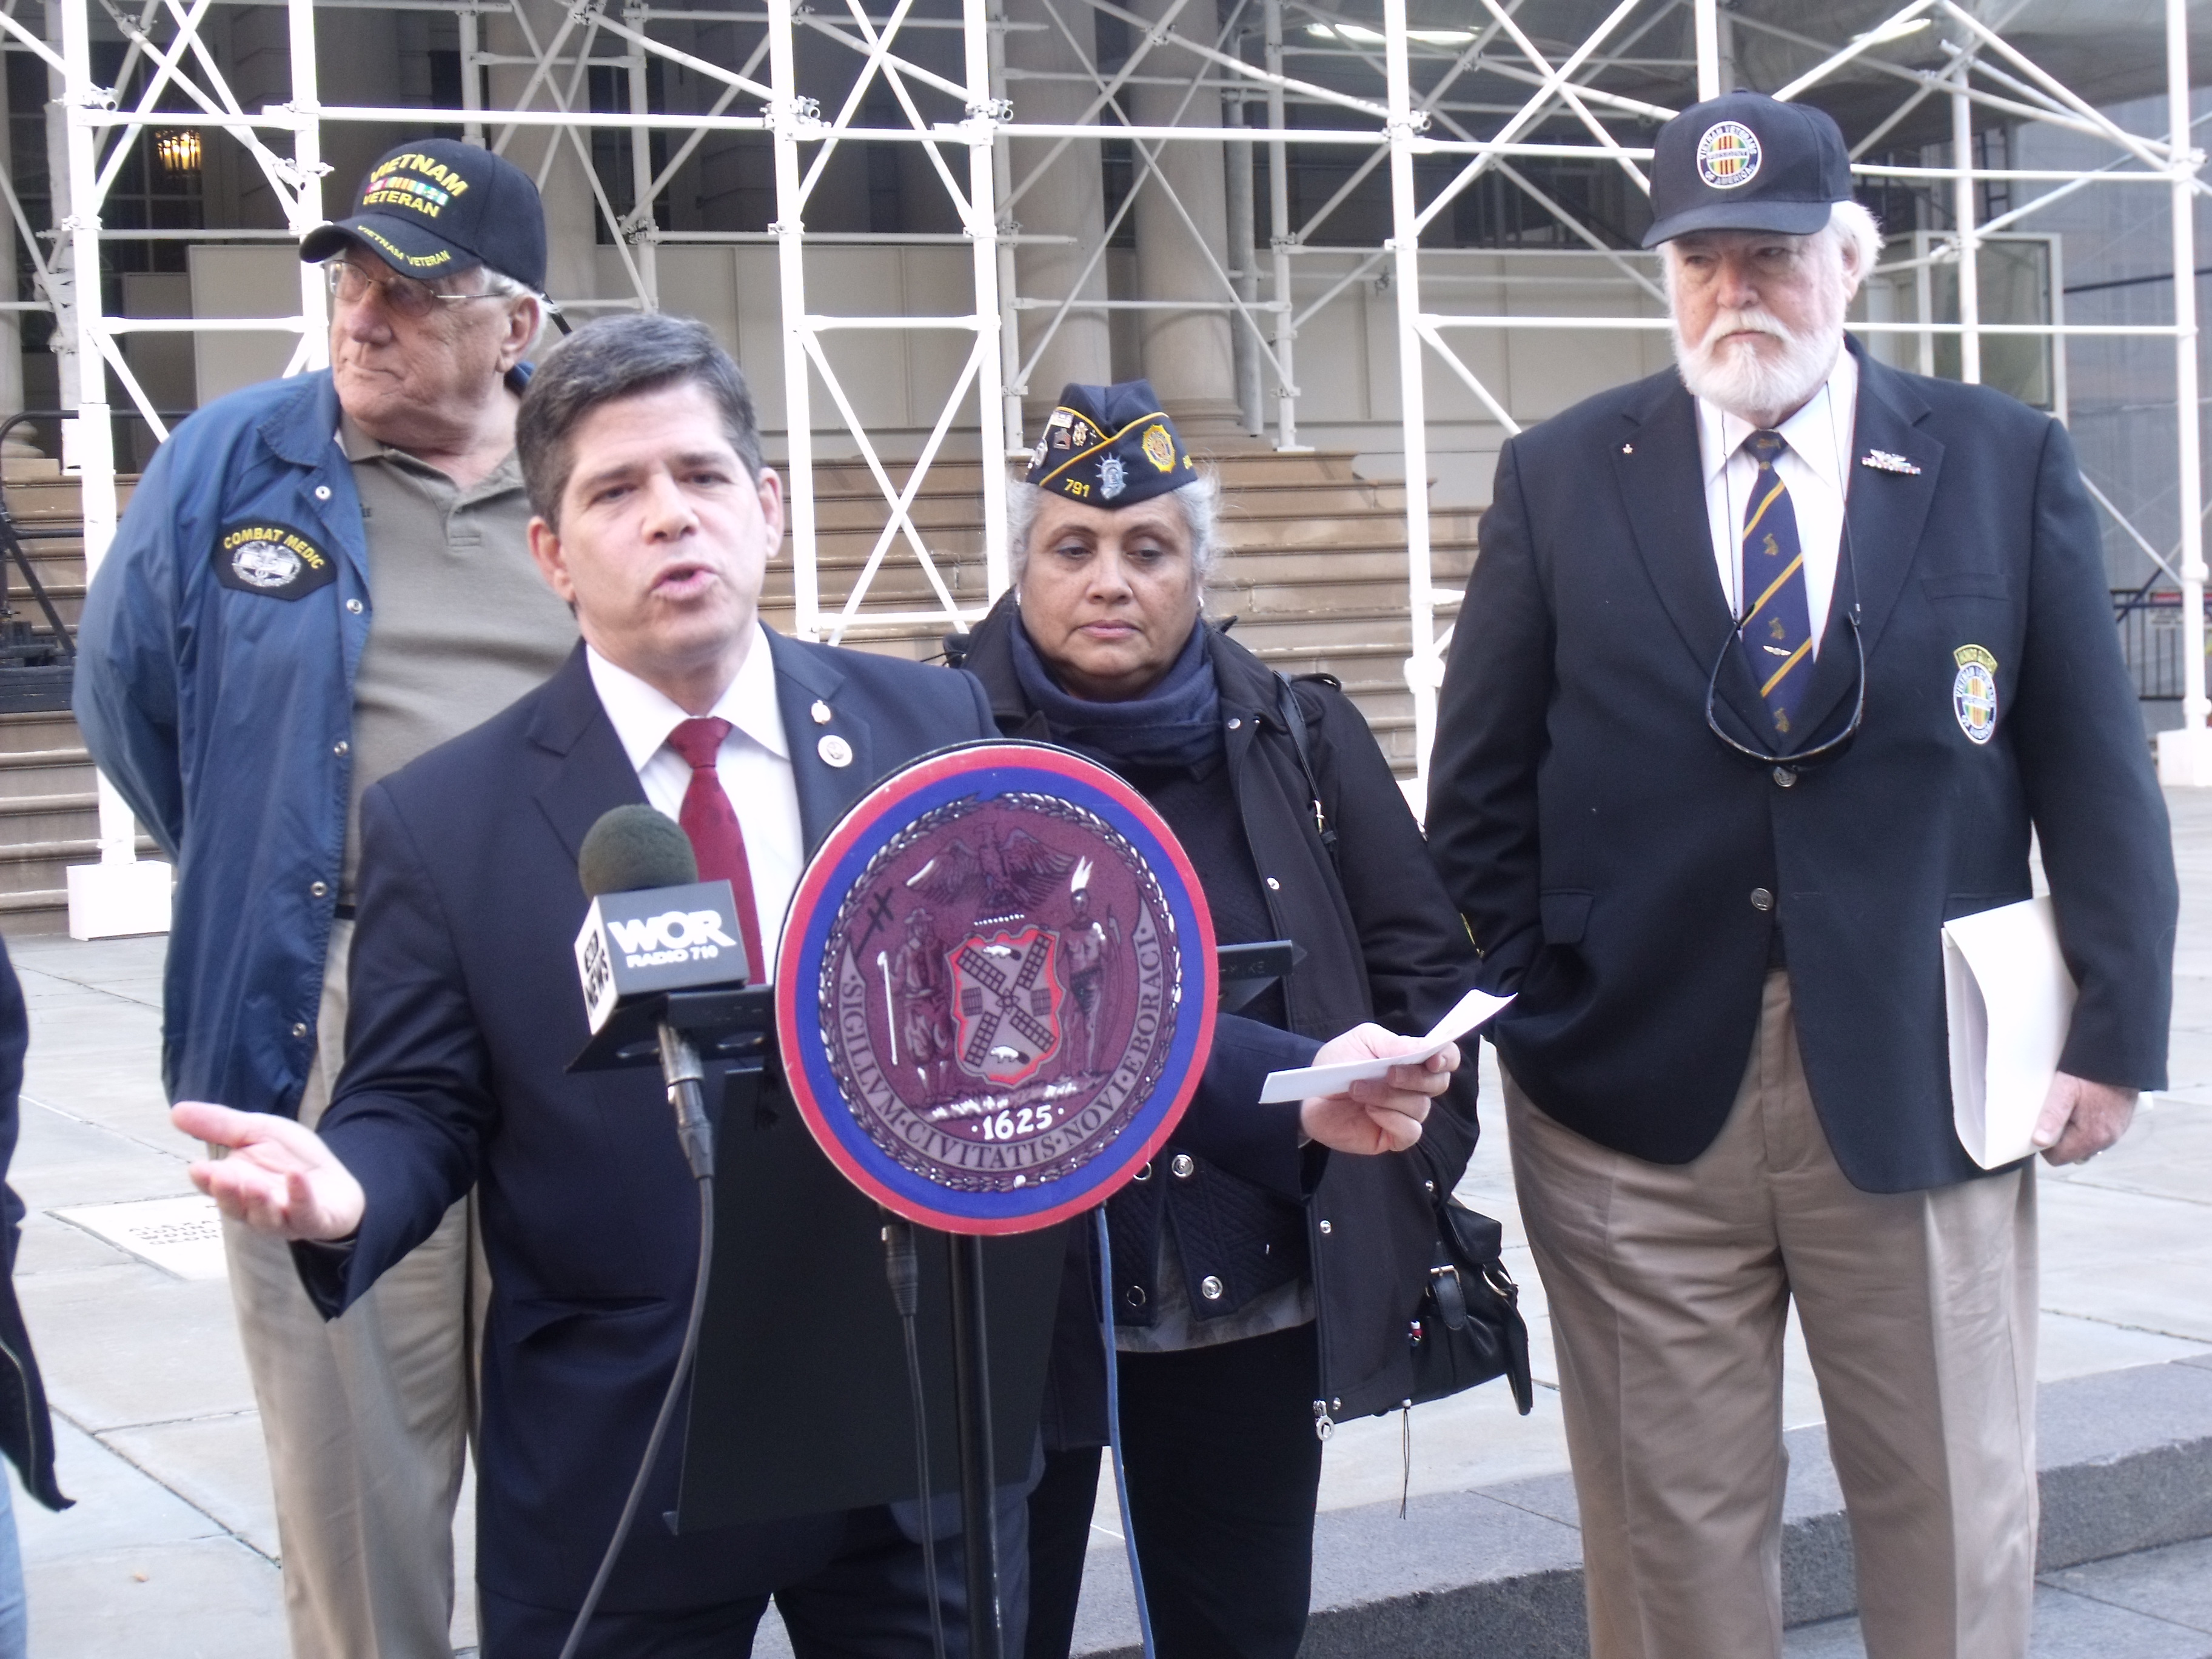 Councilman Vincent Gentile and veterans during a press conference on the City Hall steps. (Photo: Jillian Jorgensen) 